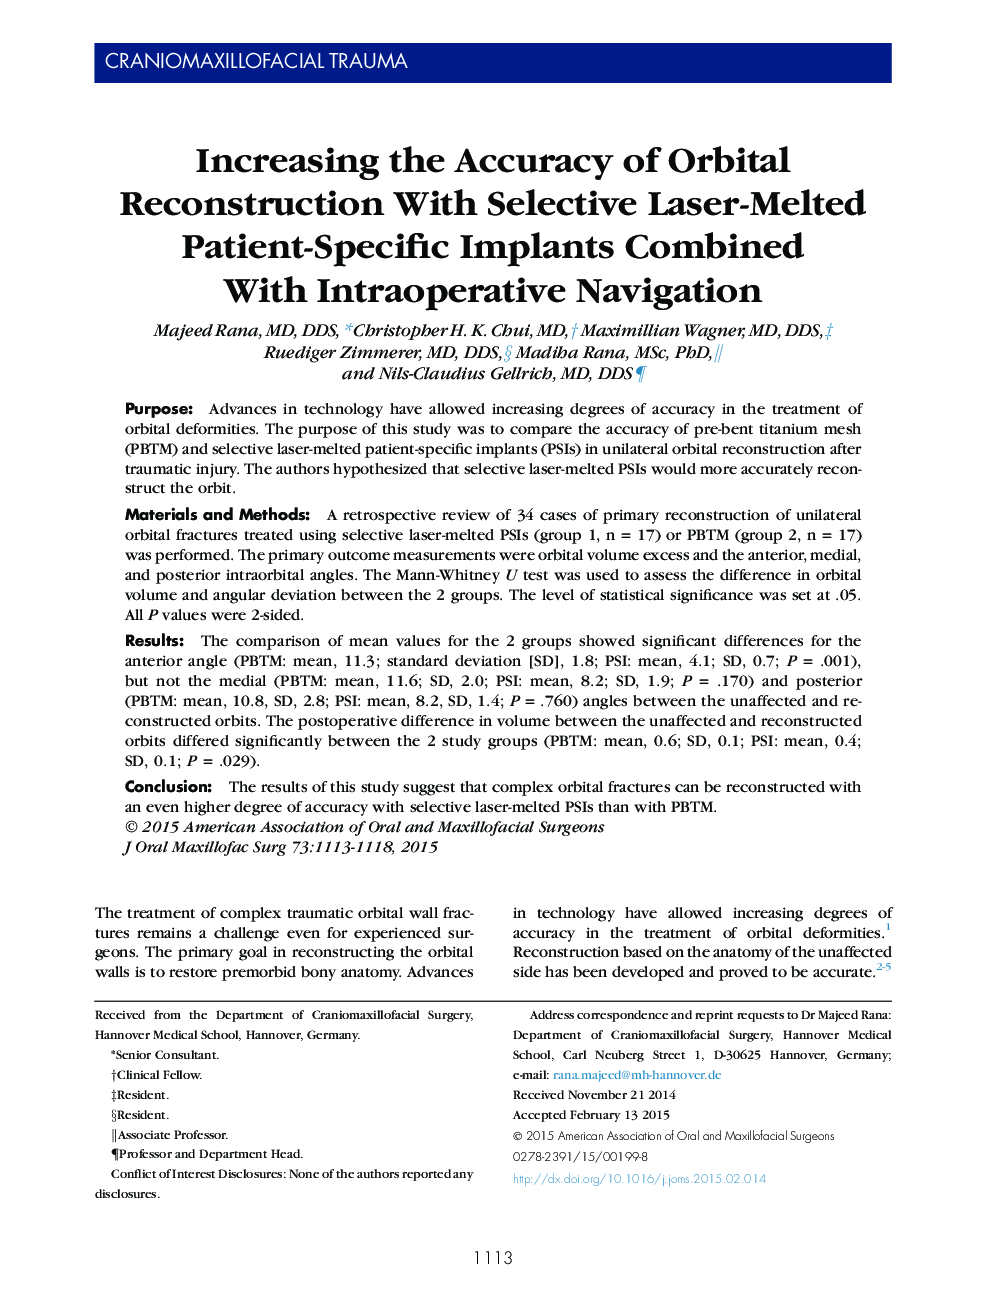 Increasing the Accuracy of Orbital Reconstruction With Selective Laser-Melted Patient-Specific Implants Combined With Intraoperative Navigation 